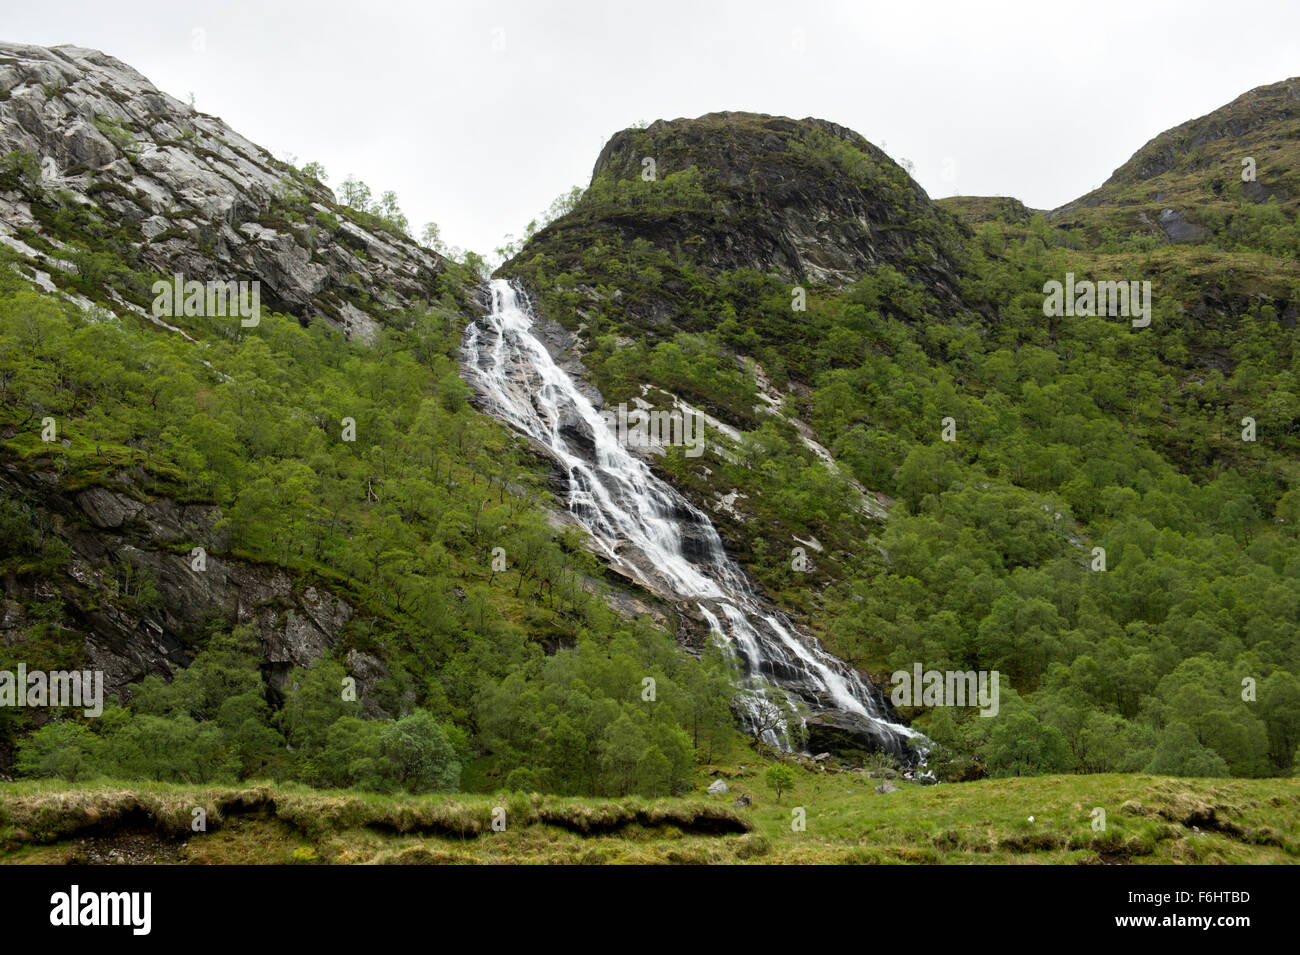 The majestic waterfalls at Steall tumbling into the water of Nevis deep in Glen Nevis Stock Photo